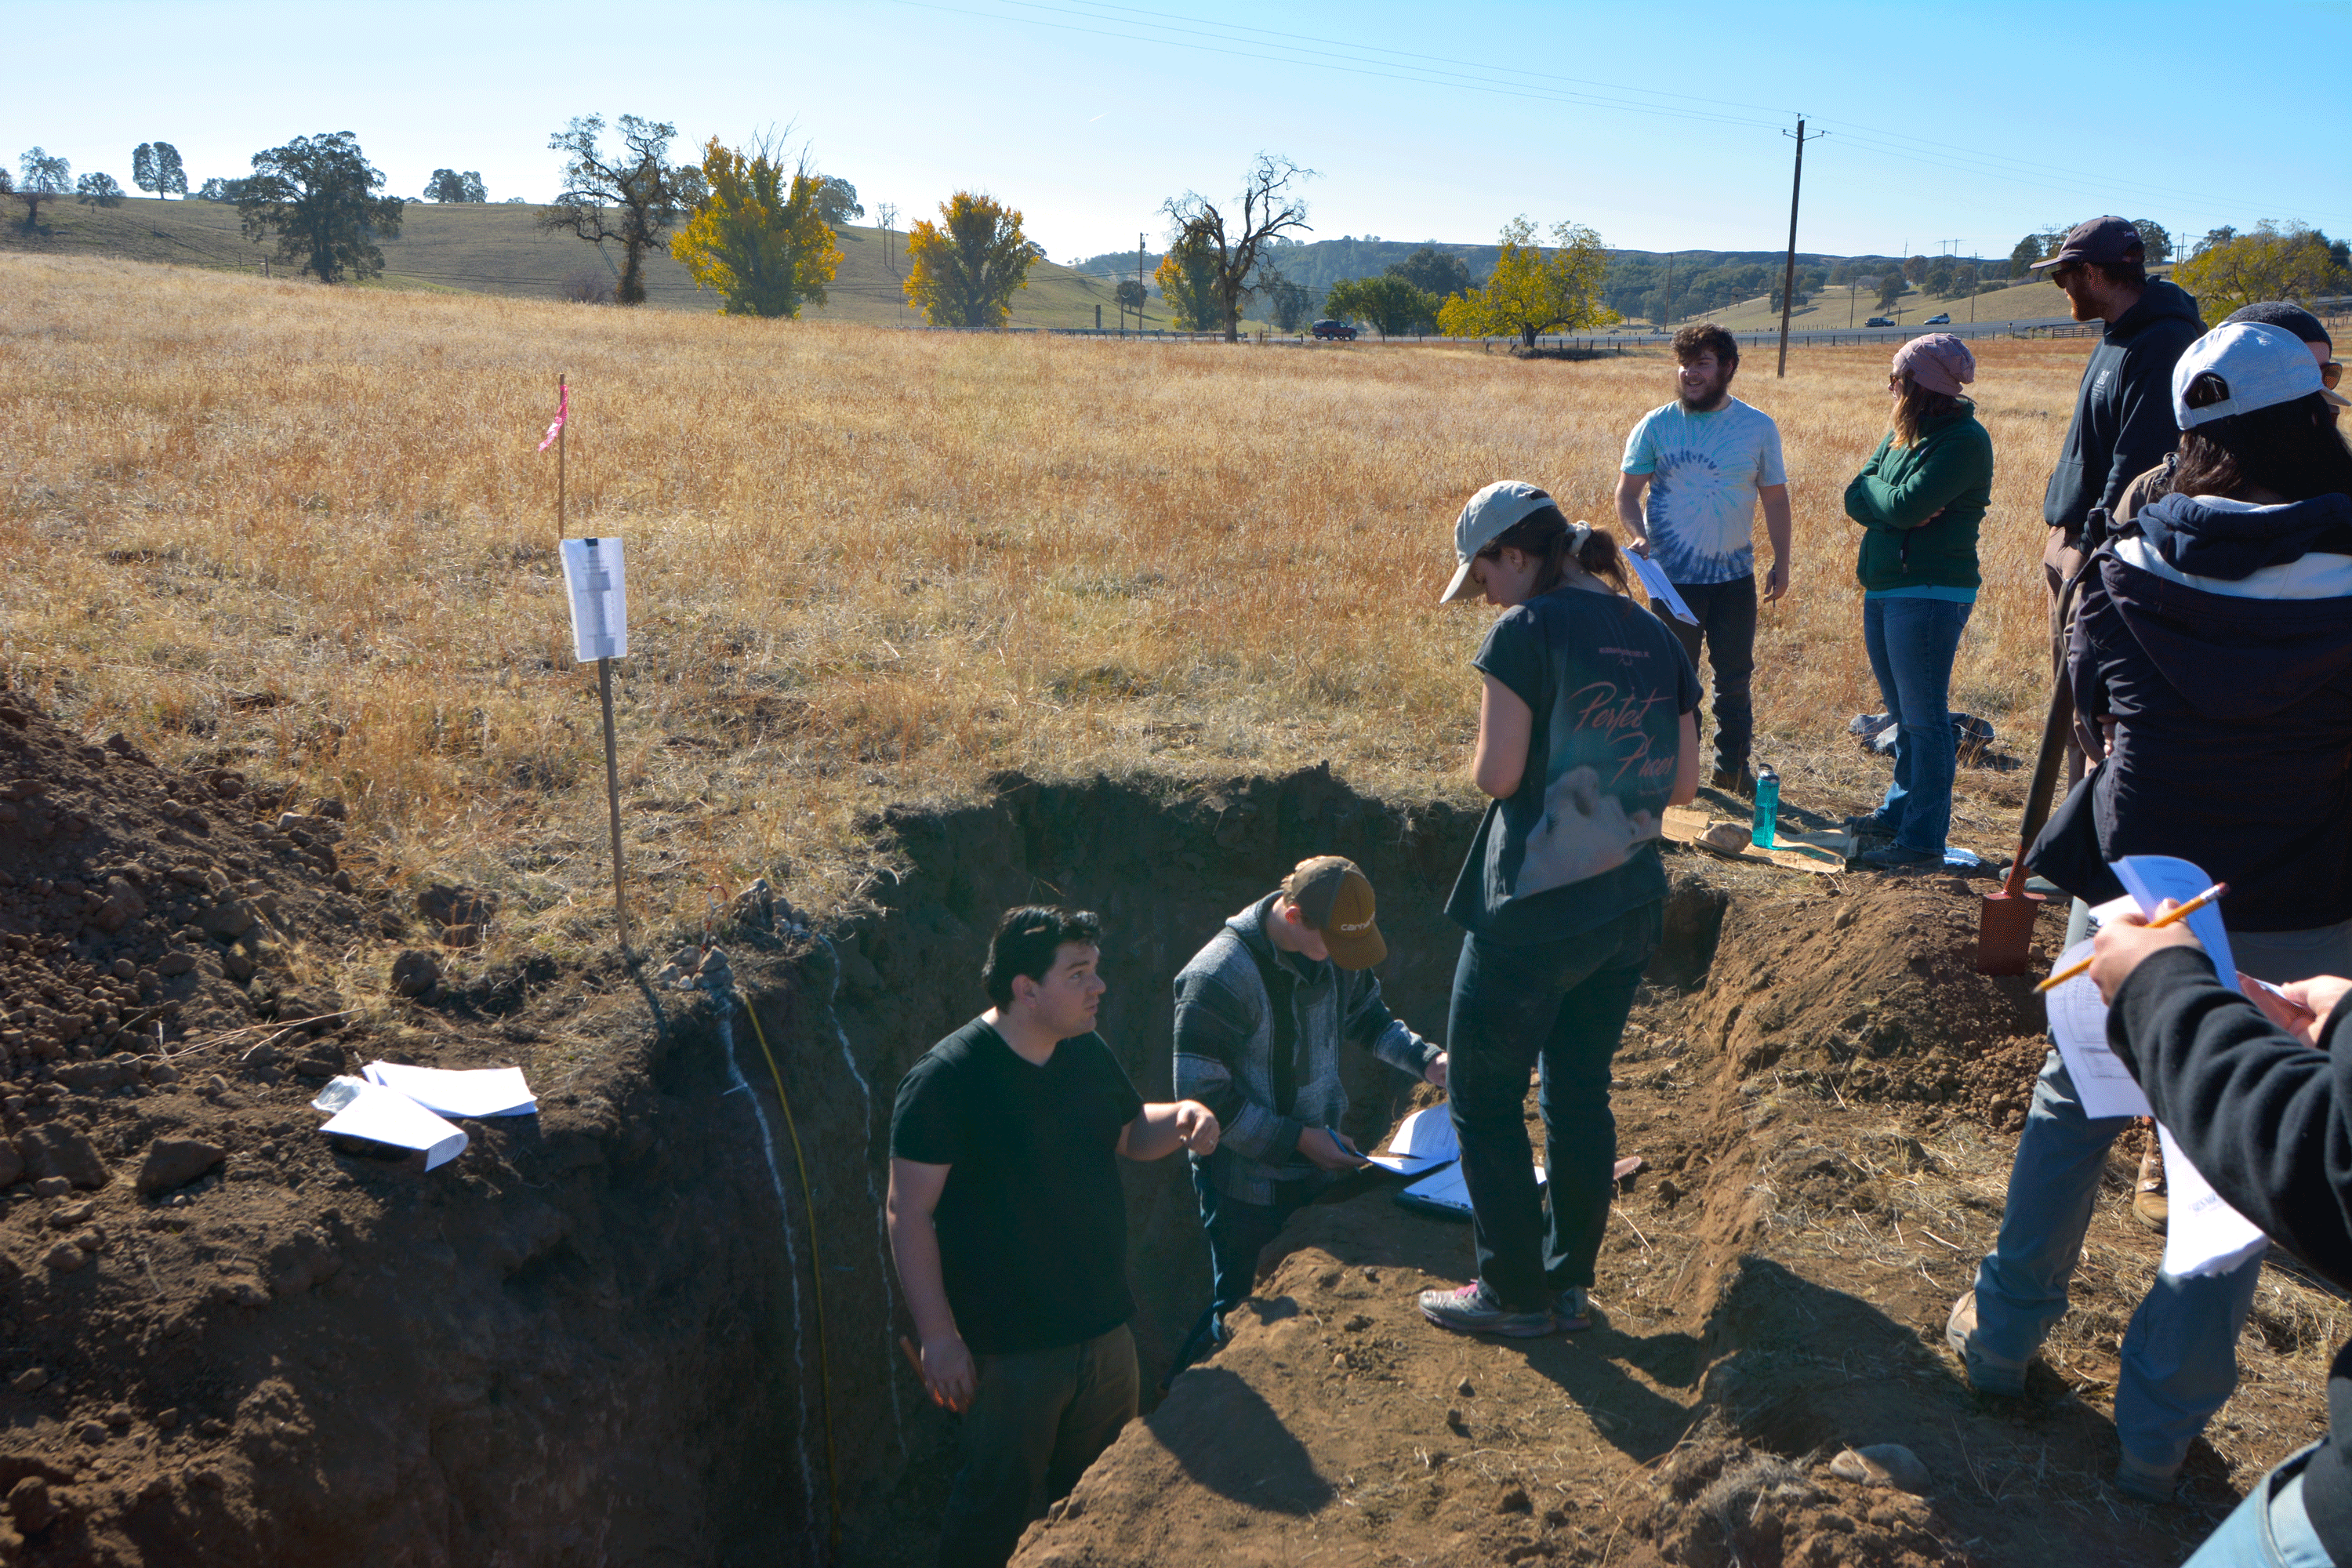 A student stands in a trench while other students observe.